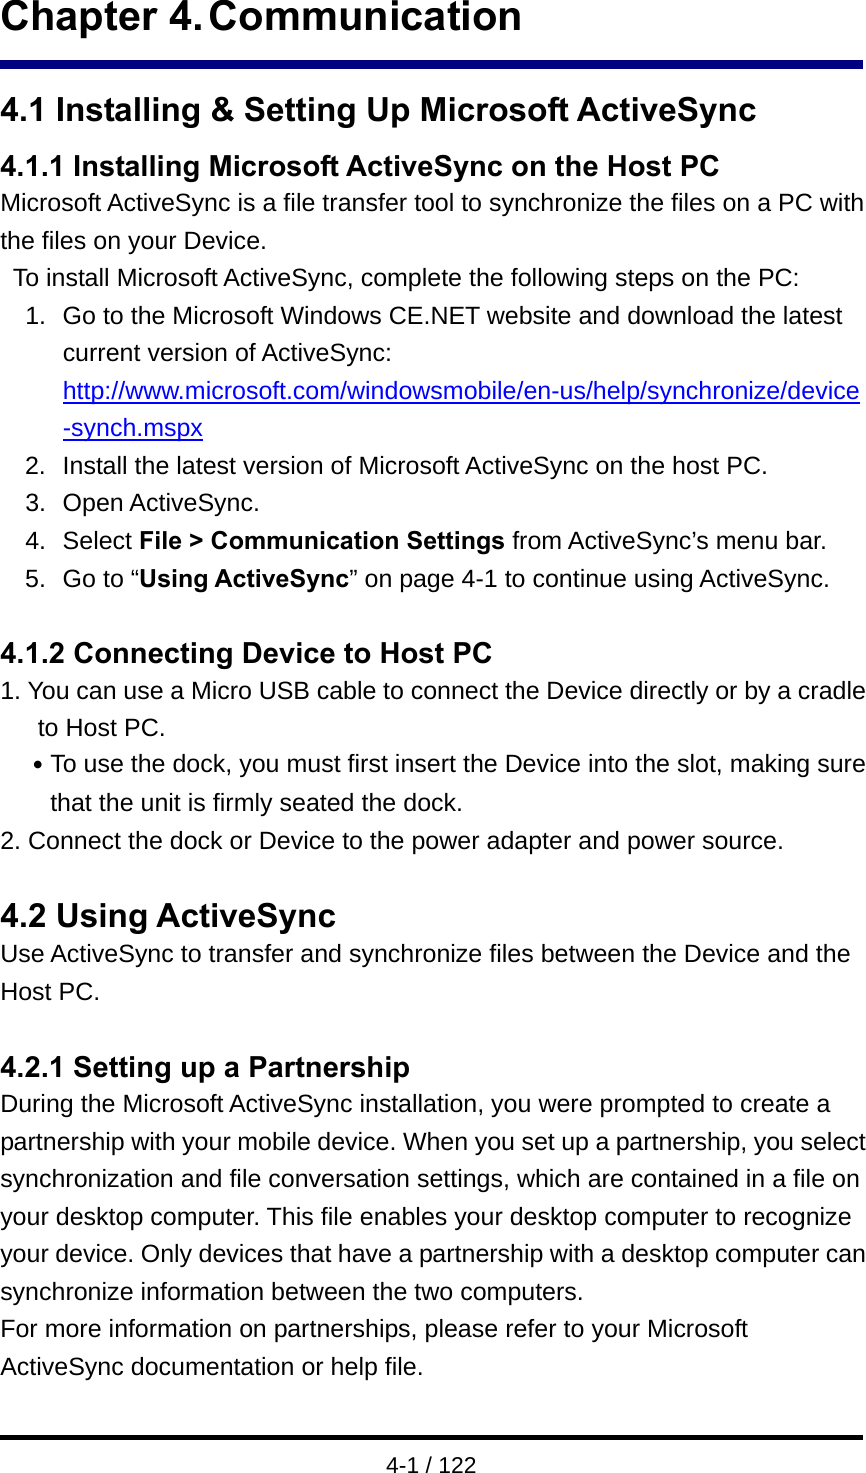  4-1 / 122 Chapter 4. Communication 4.1 Installing &amp; Setting Up Microsoft ActiveSync 4.1.1 Installing Microsoft ActiveSync on the Host PC Microsoft ActiveSync is a file transfer tool to synchronize the files on a PC with the files on your Device.     To install Microsoft ActiveSync, complete the following steps on the PC: 1.  Go to the Microsoft Windows CE.NET website and download the latest current version of ActiveSync: http://www.microsoft.com/windowsmobile/en-us/help/synchronize/device-synch.mspx 2.  Install the latest version of Microsoft ActiveSync on the host PC. 3. Open ActiveSync. 4. Select File &gt; Communication Settings from ActiveSync’s menu bar. 5. Go to “Using ActiveSync” on page 4-1 to continue using ActiveSync.  4.1.2 Connecting Device to Host PC 1. You can use a Micro USB cable to connect the Device directly or by a cradle to Host PC. ․To use the dock, you must first insert the Device into the slot, making sure that the unit is firmly seated the dock. 2. Connect the dock or Device to the power adapter and power source.   4.2 Using ActiveSync Use ActiveSync to transfer and synchronize files between the Device and the Host PC.  4.2.1 Setting up a Partnership During the Microsoft ActiveSync installation, you were prompted to create a partnership with your mobile device. When you set up a partnership, you select synchronization and file conversation settings, which are contained in a file on your desktop computer. This file enables your desktop computer to recognize your device. Only devices that have a partnership with a desktop computer can synchronize information between the two computers. For more information on partnerships, please refer to your Microsoft ActiveSync documentation or help file.    